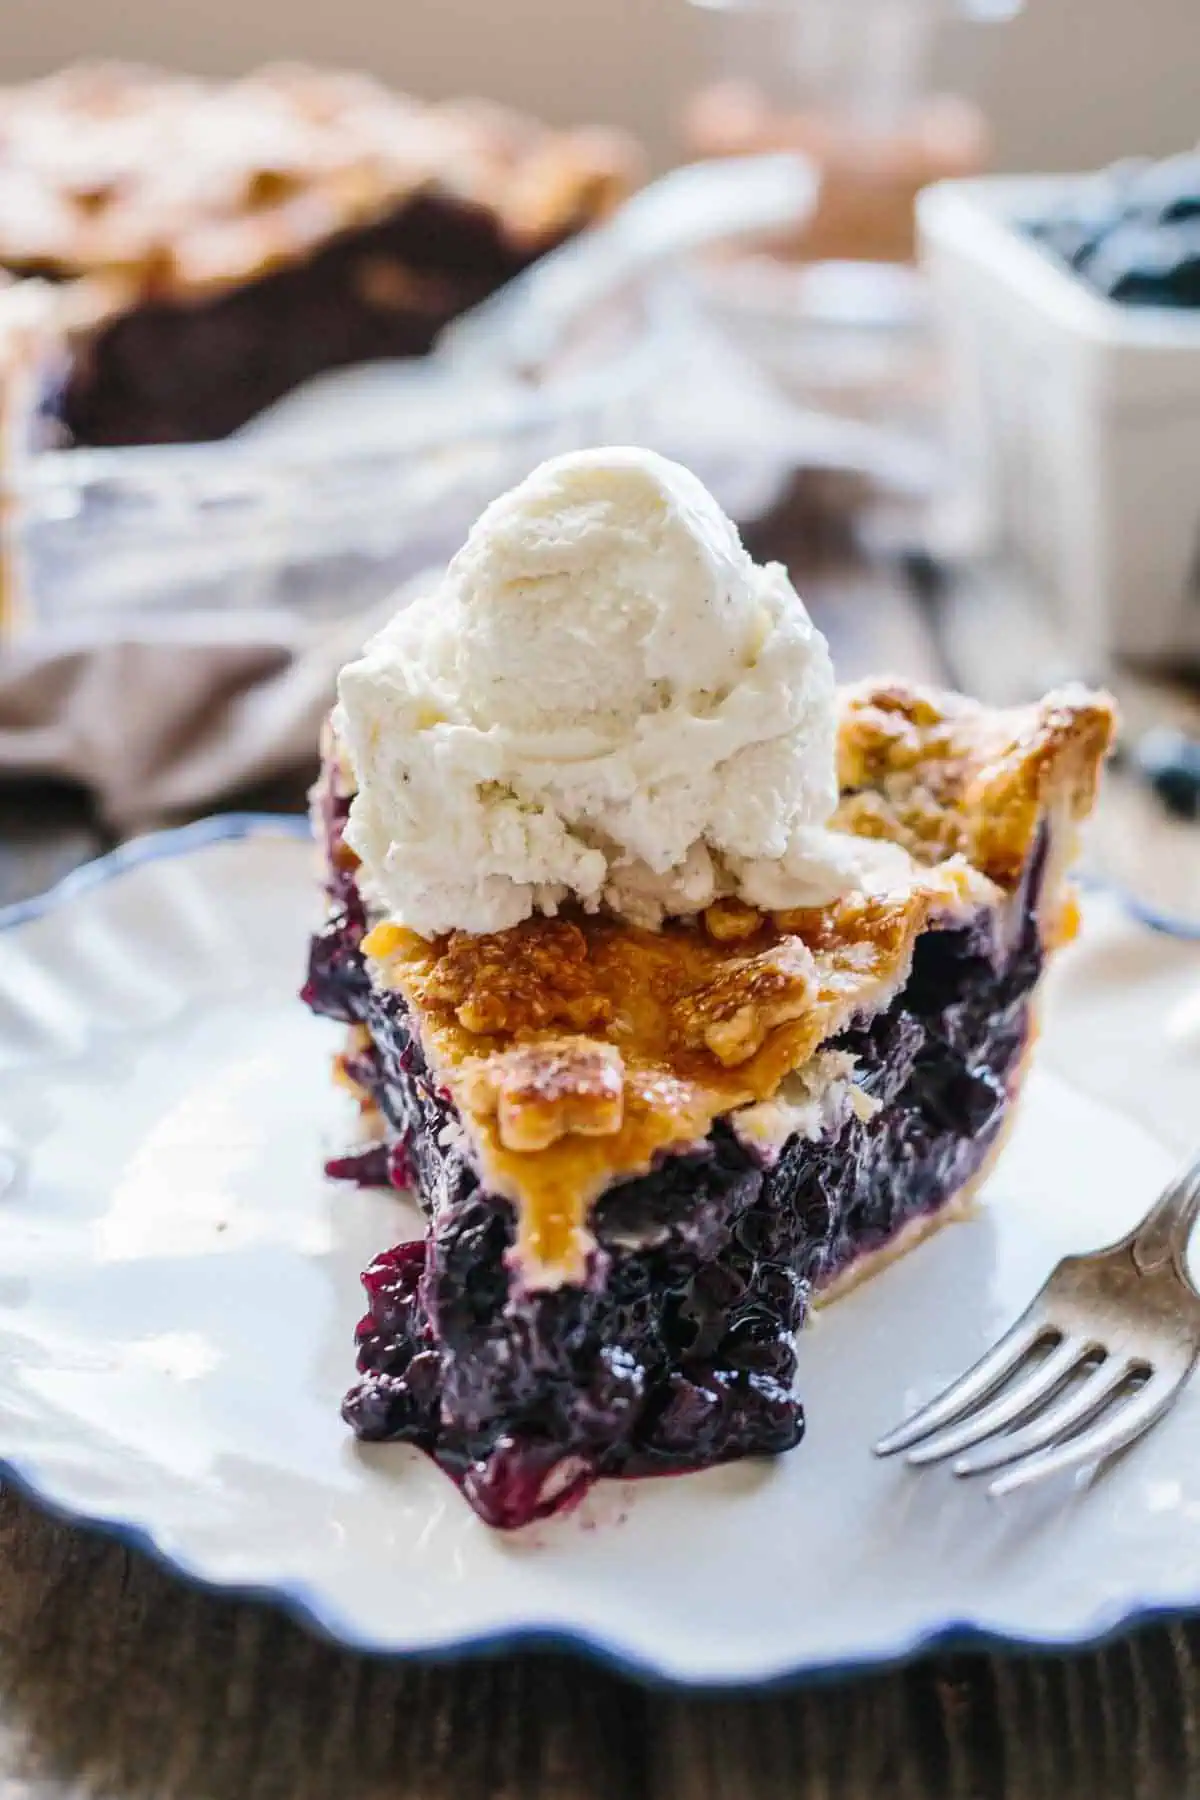 A slice of old fashioned blueberry pie with vanilla ice cream on top.